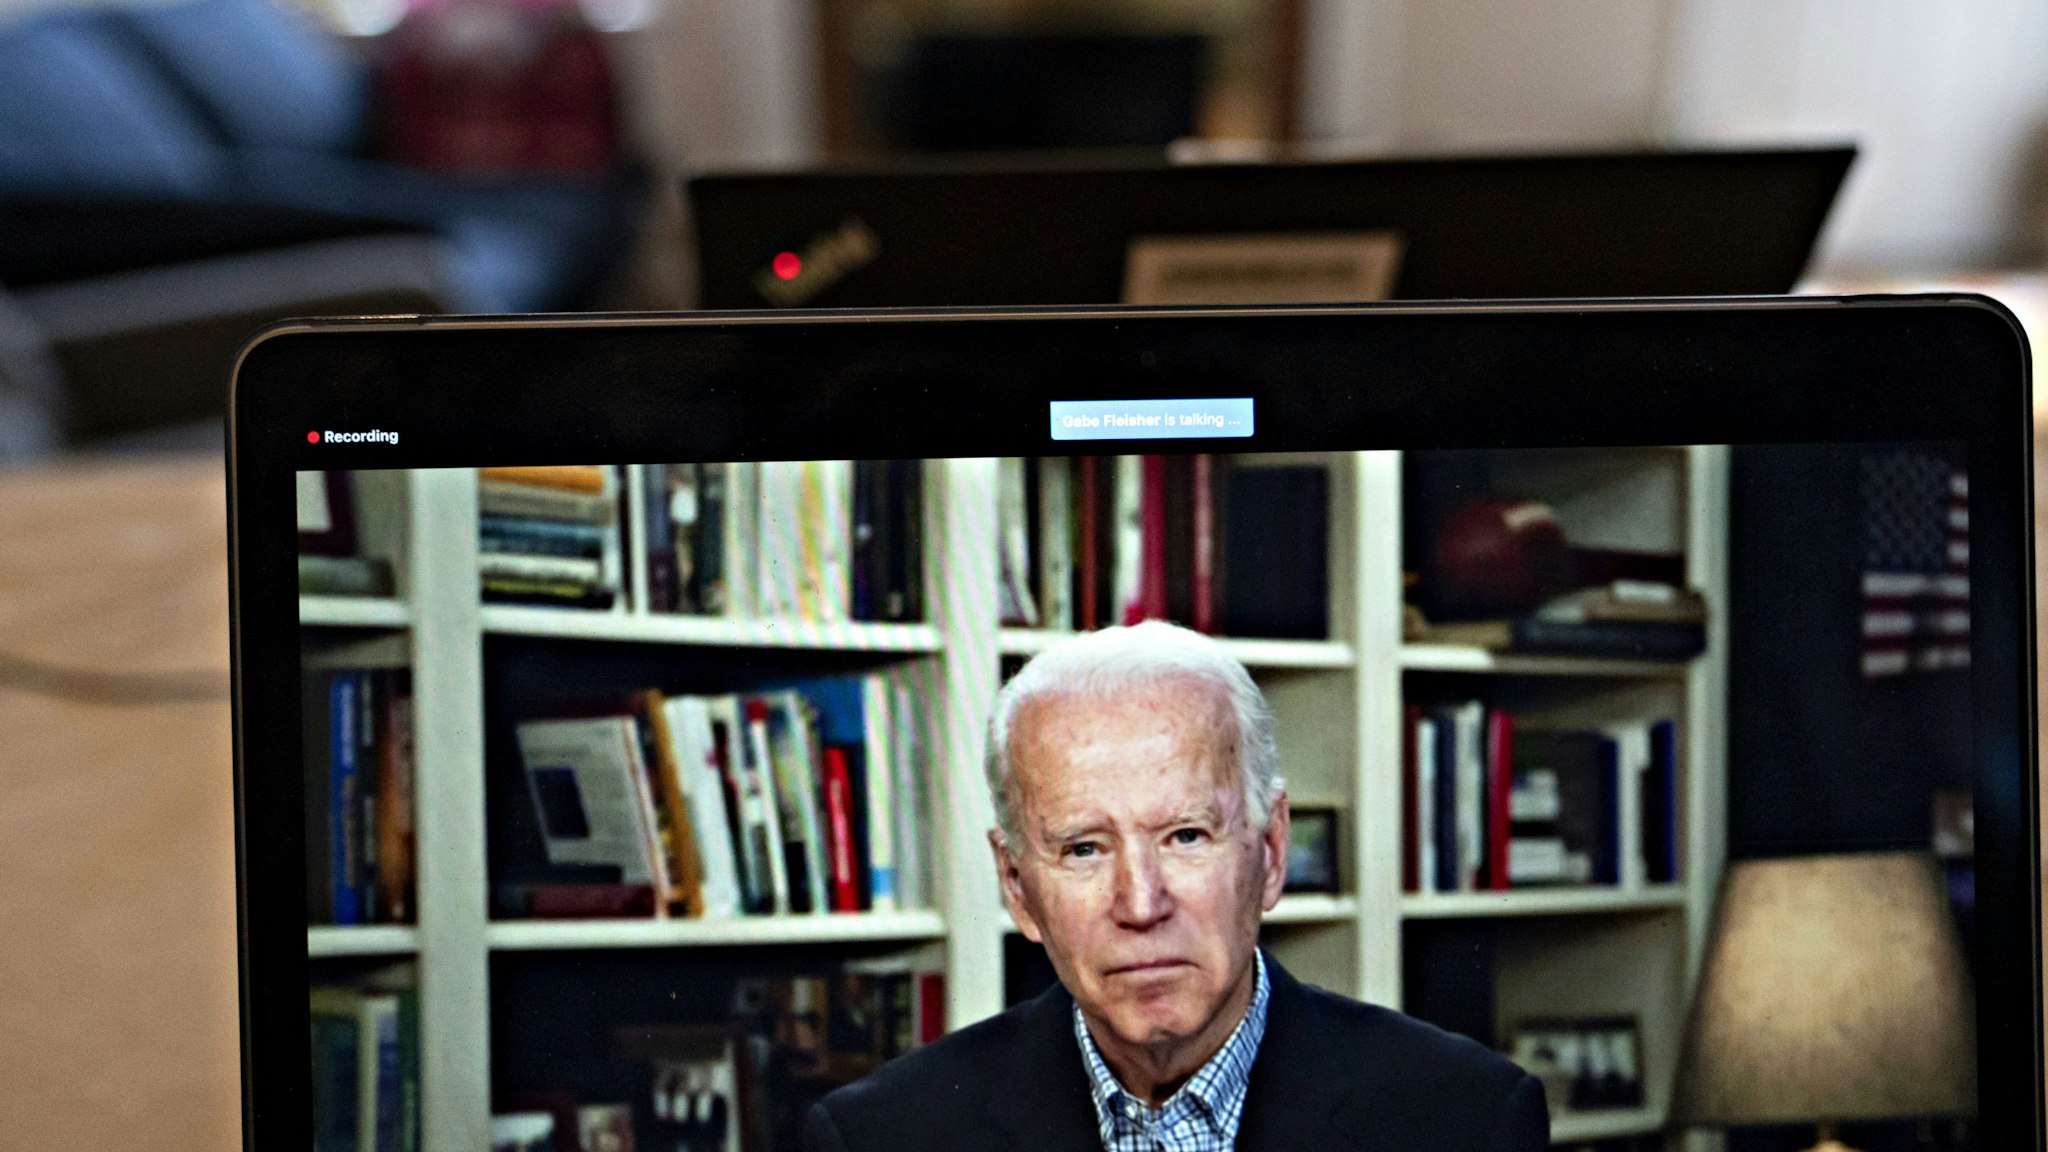 Former Vice President Joe Biden, 2020 Democratic presidential candidate, listens to a question during a virtual press briefing on a laptop computer in this arranged photograph in Arlington, Virginia, U.S., on Wednesday, March 25, 2020. During the livestreamed news conference today, Biden said he didn't see the need for another debate, which the Democratic National Committee had previously said would happen sometime in April. Photographer: Andrew Harrer/Bloomberg via Getty Images